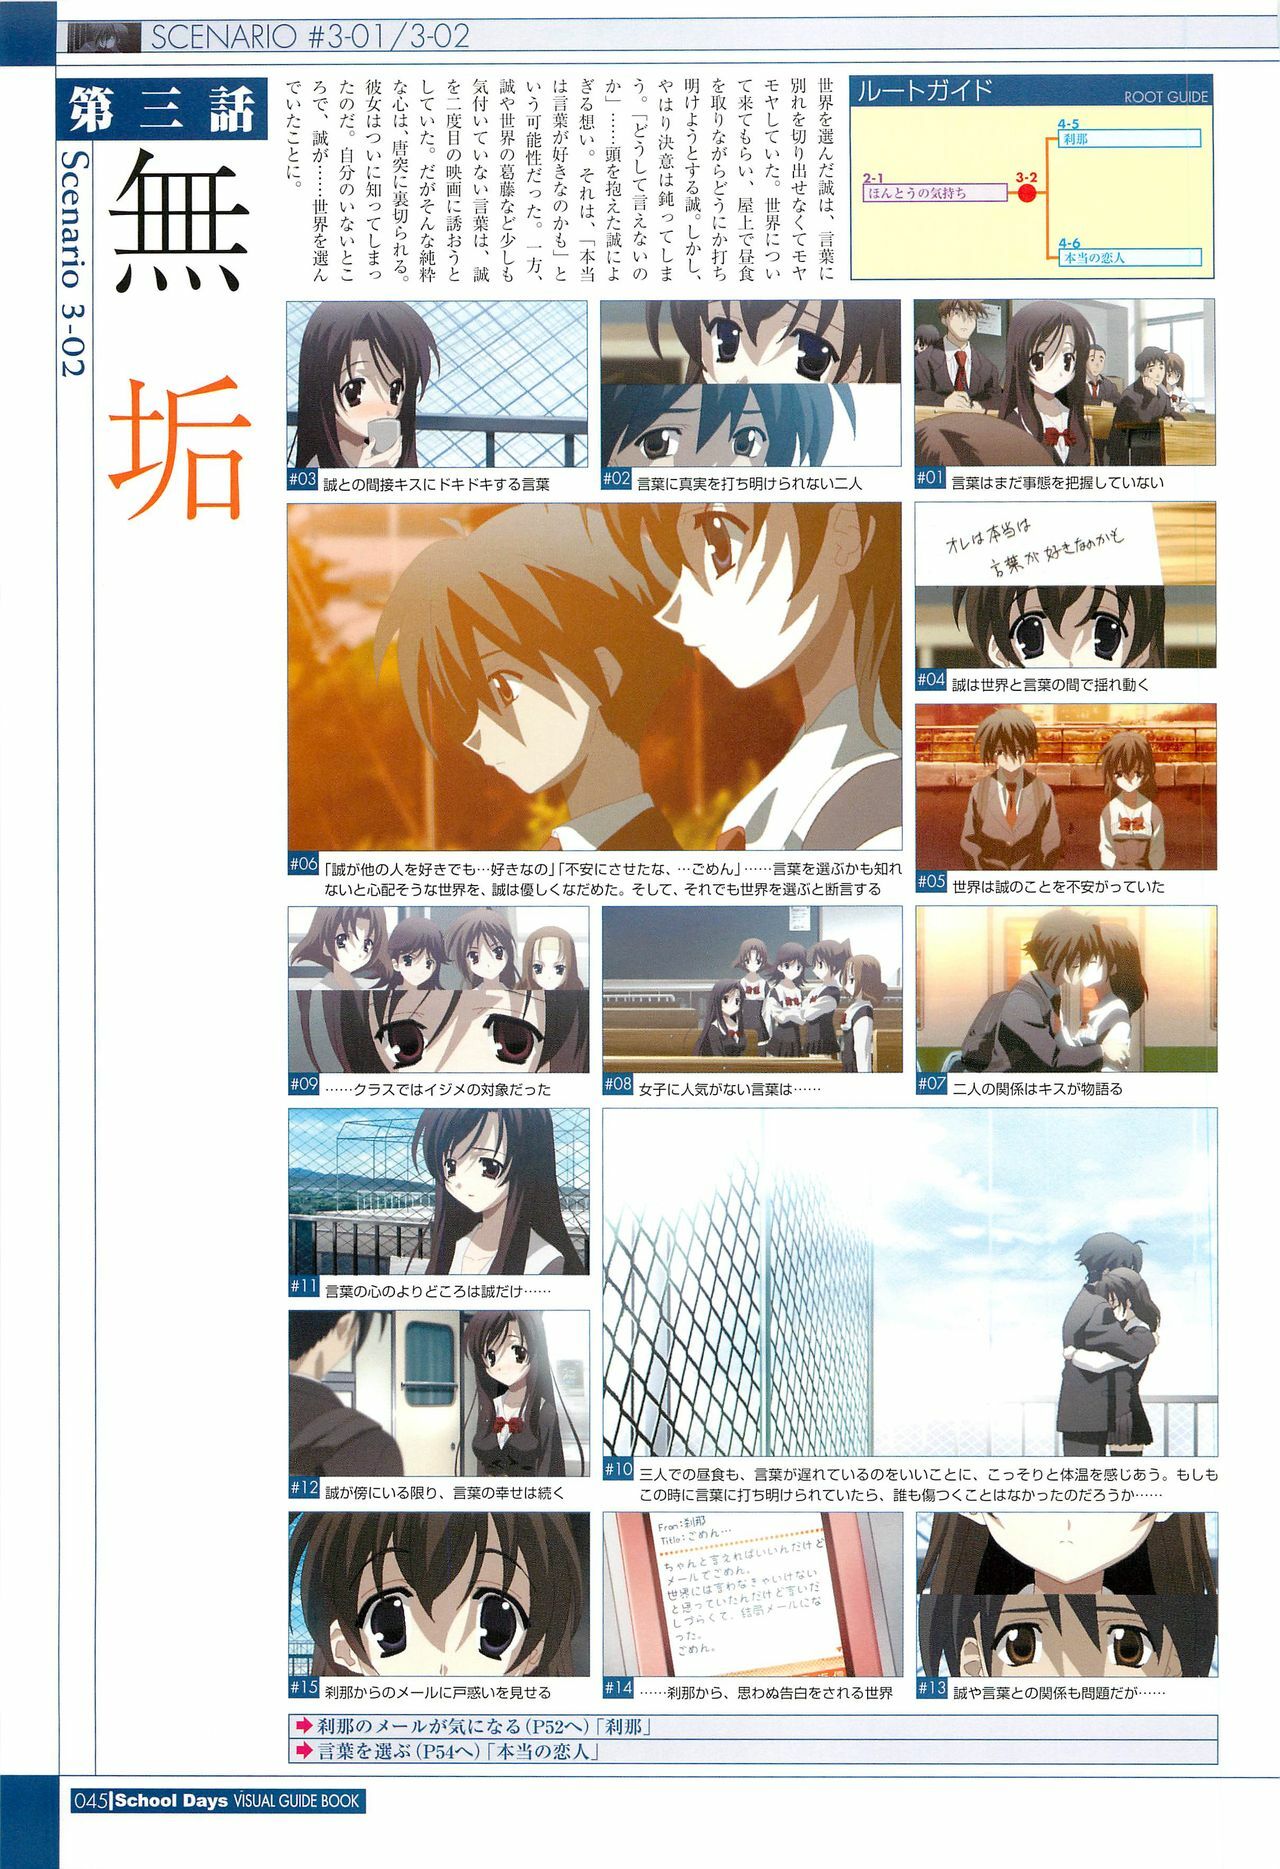 School Days Visual Guide Book page 47 full